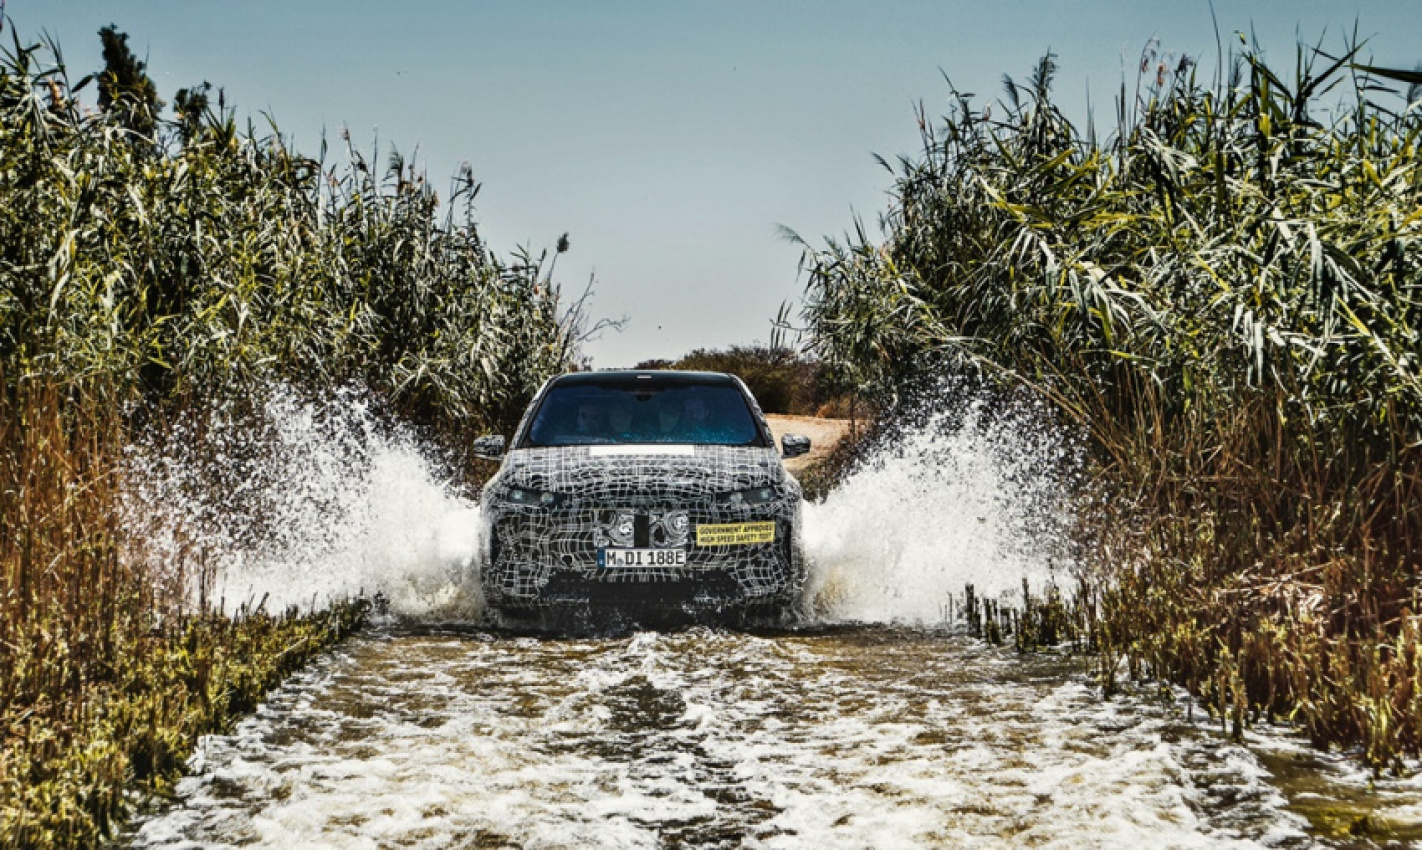 autos, bmw, cars, bmw edrive technology, bmw inext, product development, prototype, vehicle testing, bmw inext undergoes extreme testing conditions in africa